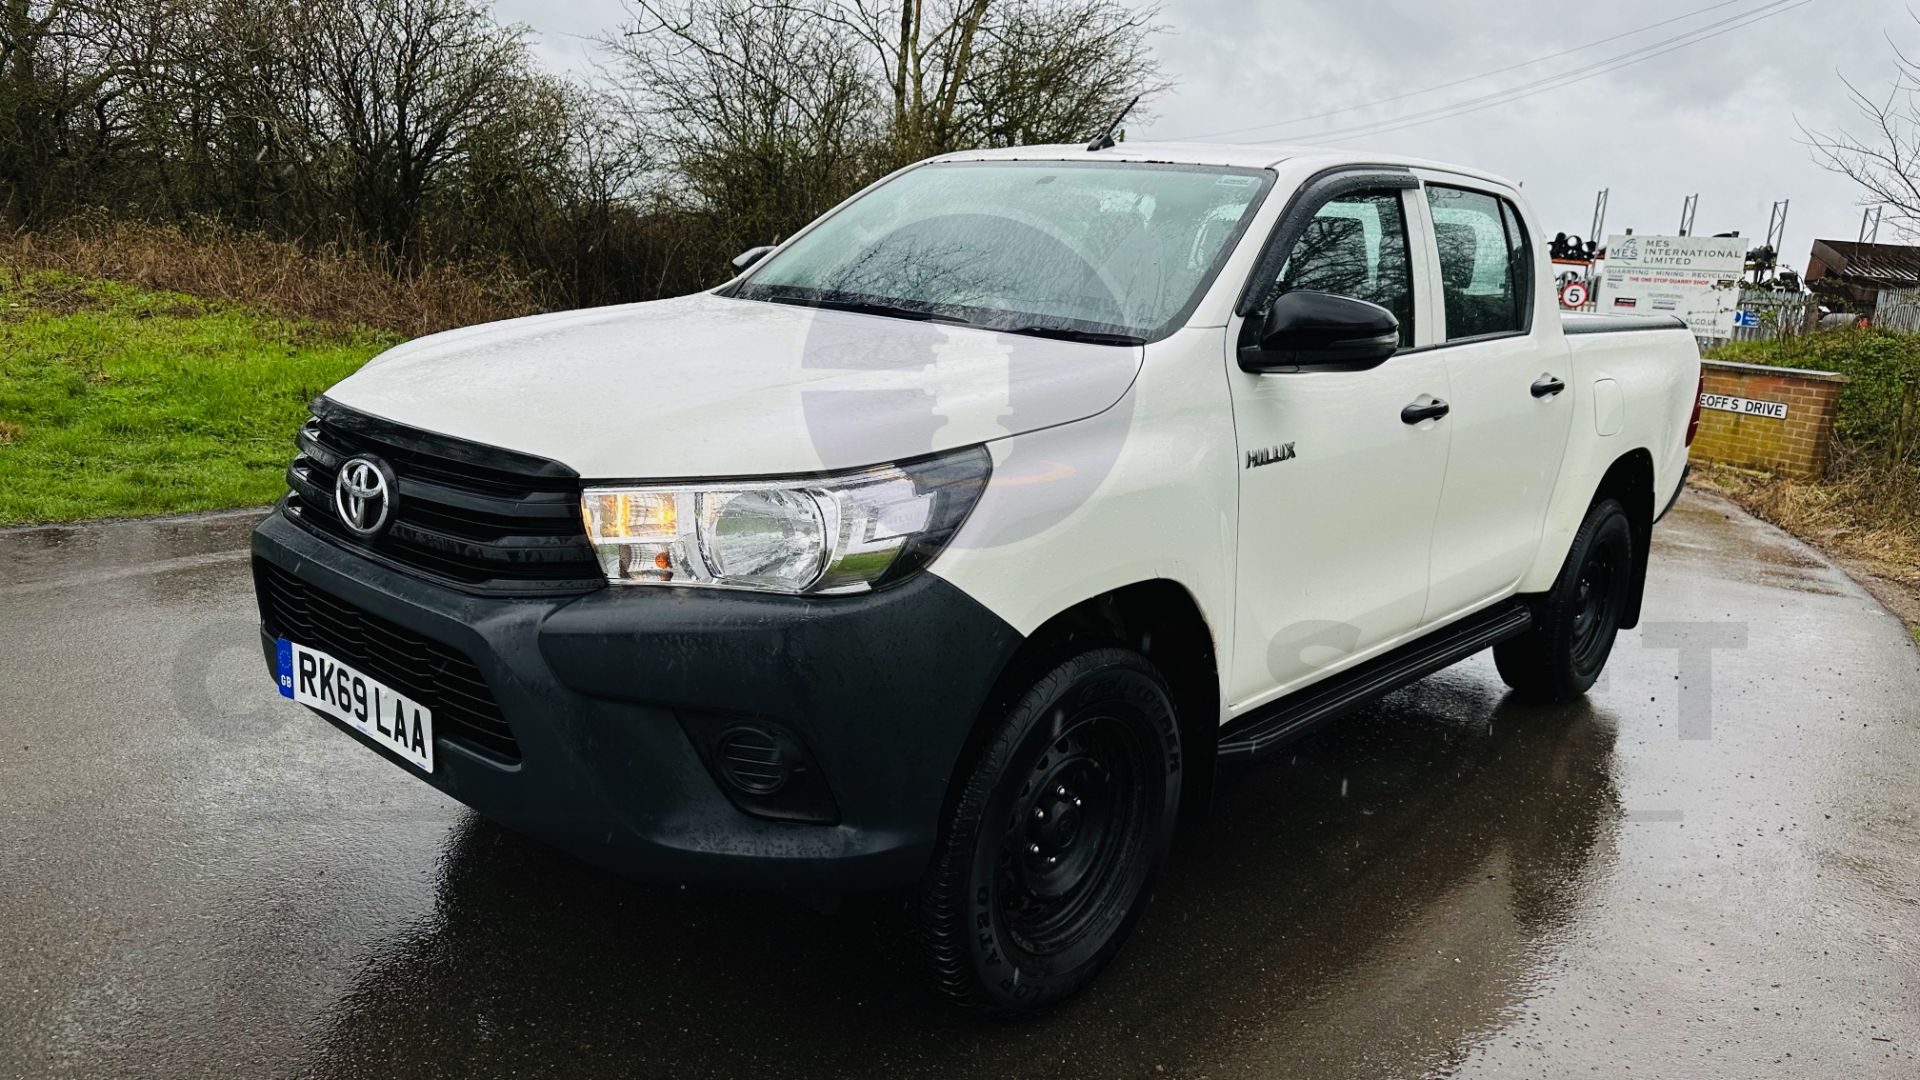 TOYOTA HILUX *DOUBLE CAB PICK-UP* (2020 - EURO 6) 2.4 D-4D - AUTO STOP/START *AIR CON* (1 OWNER) - Image 9 of 48